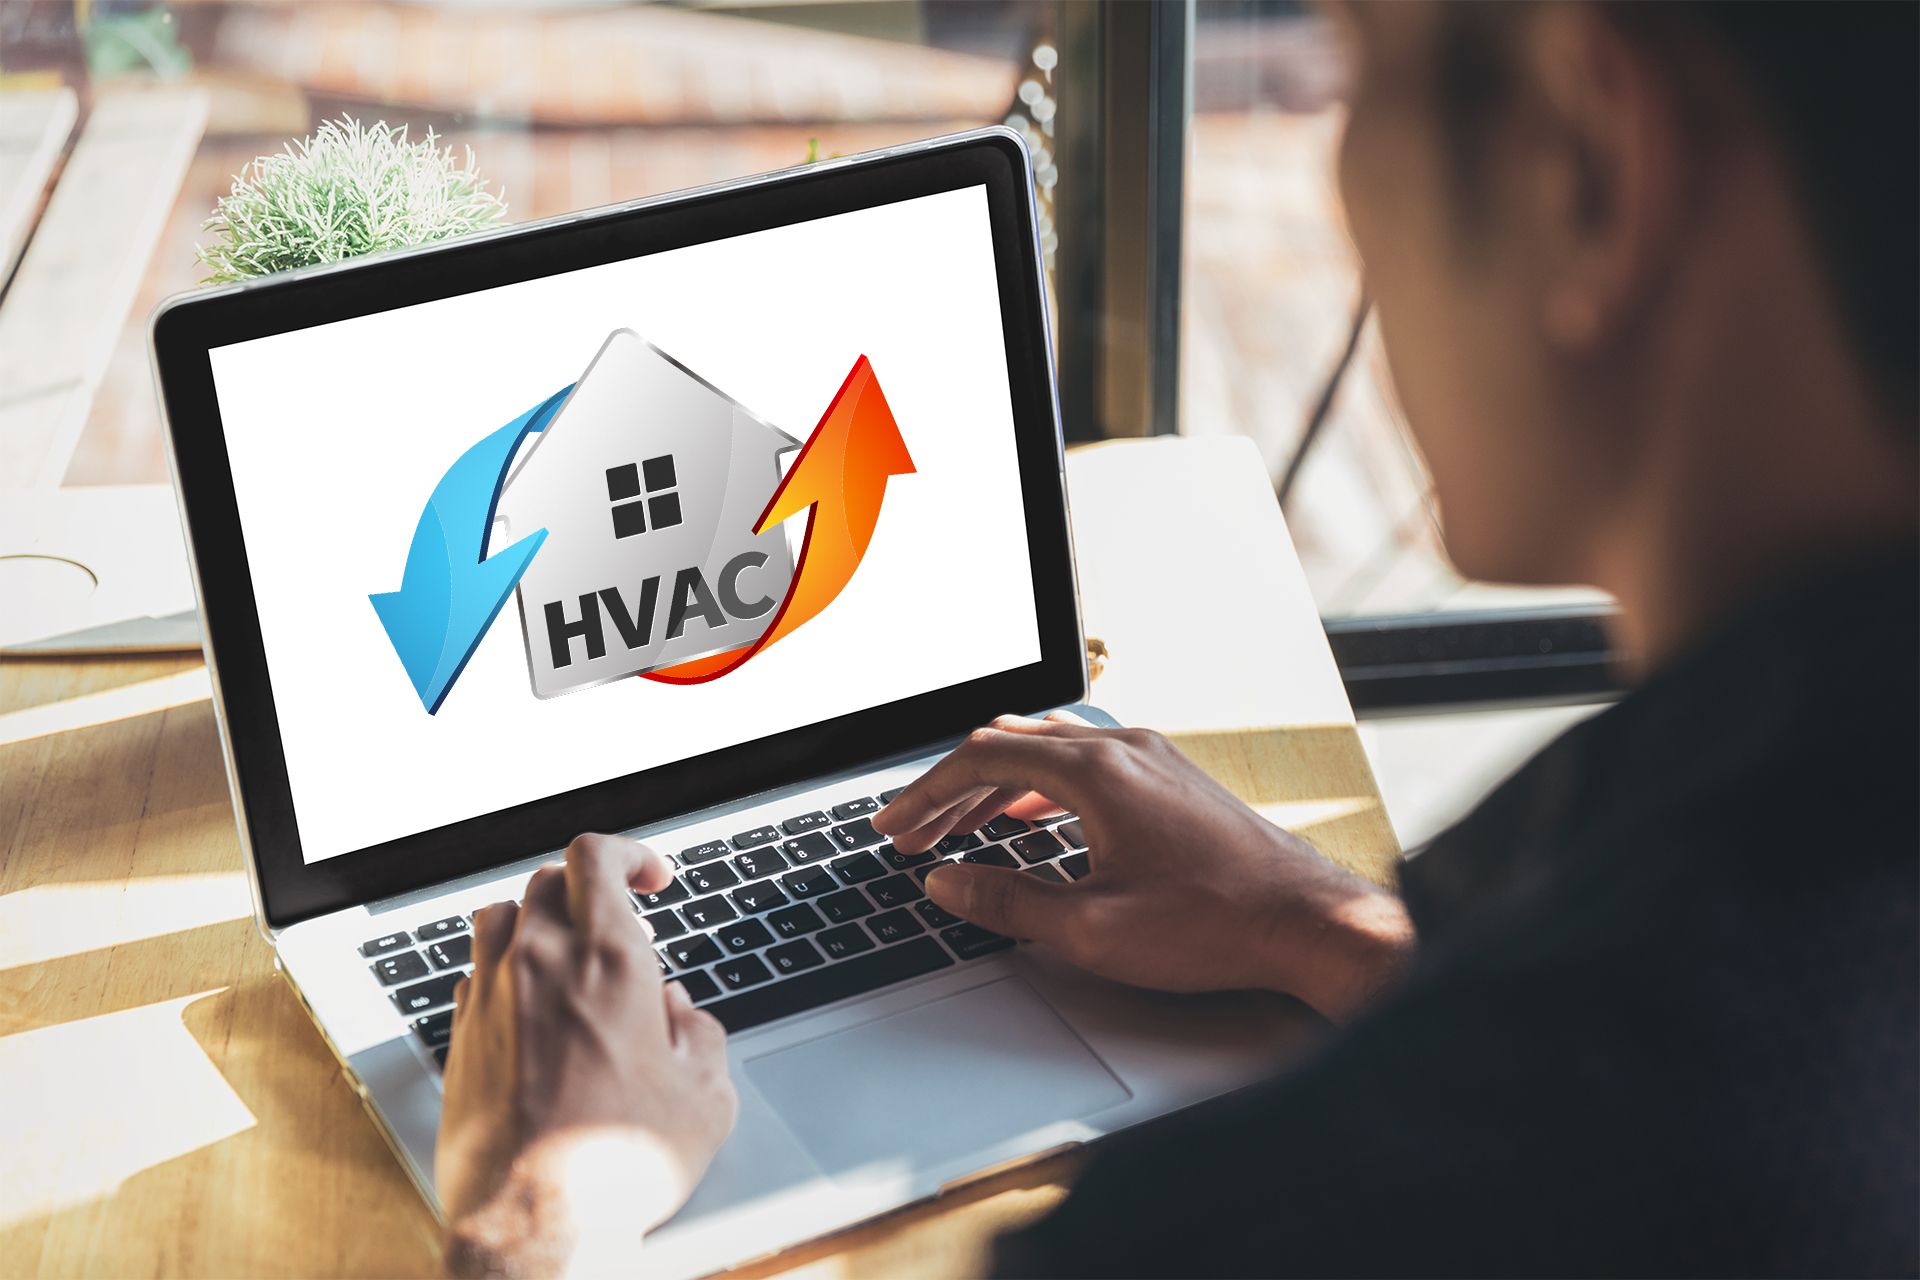 a man is using a laptop computer with a logo for hvac on the screen .